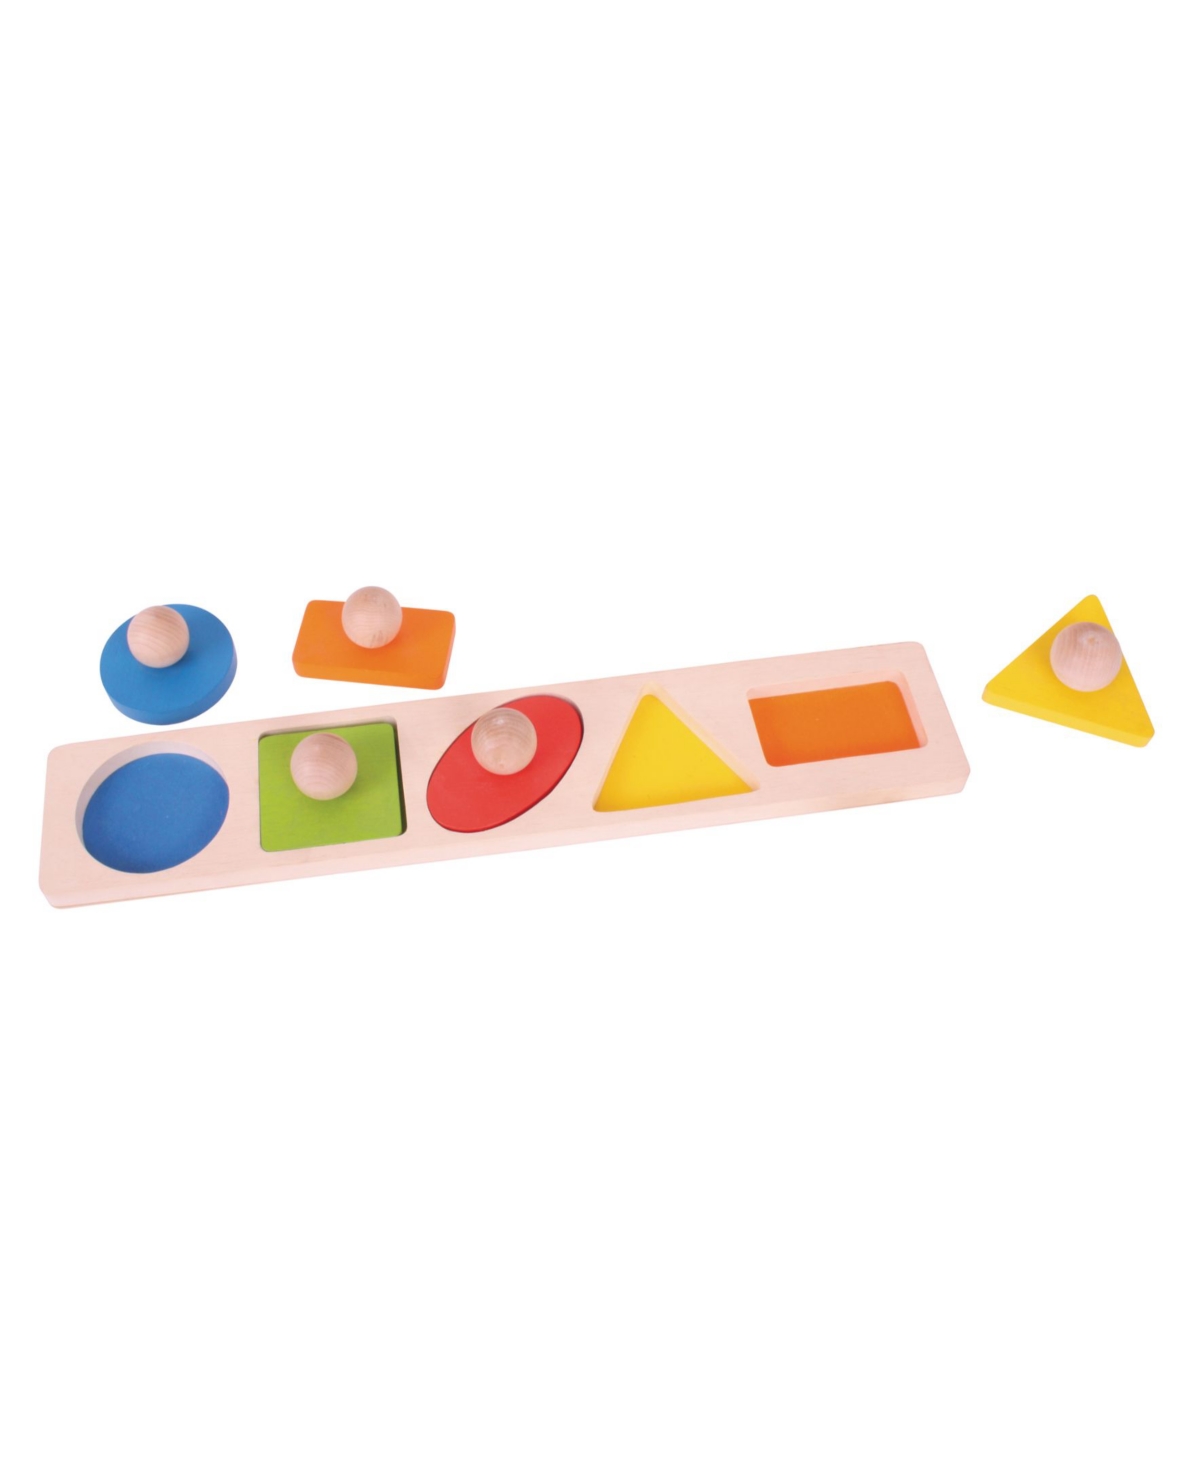 Masterpieces Puzzles Bigjigs Toys Shape Matching Board In Multi